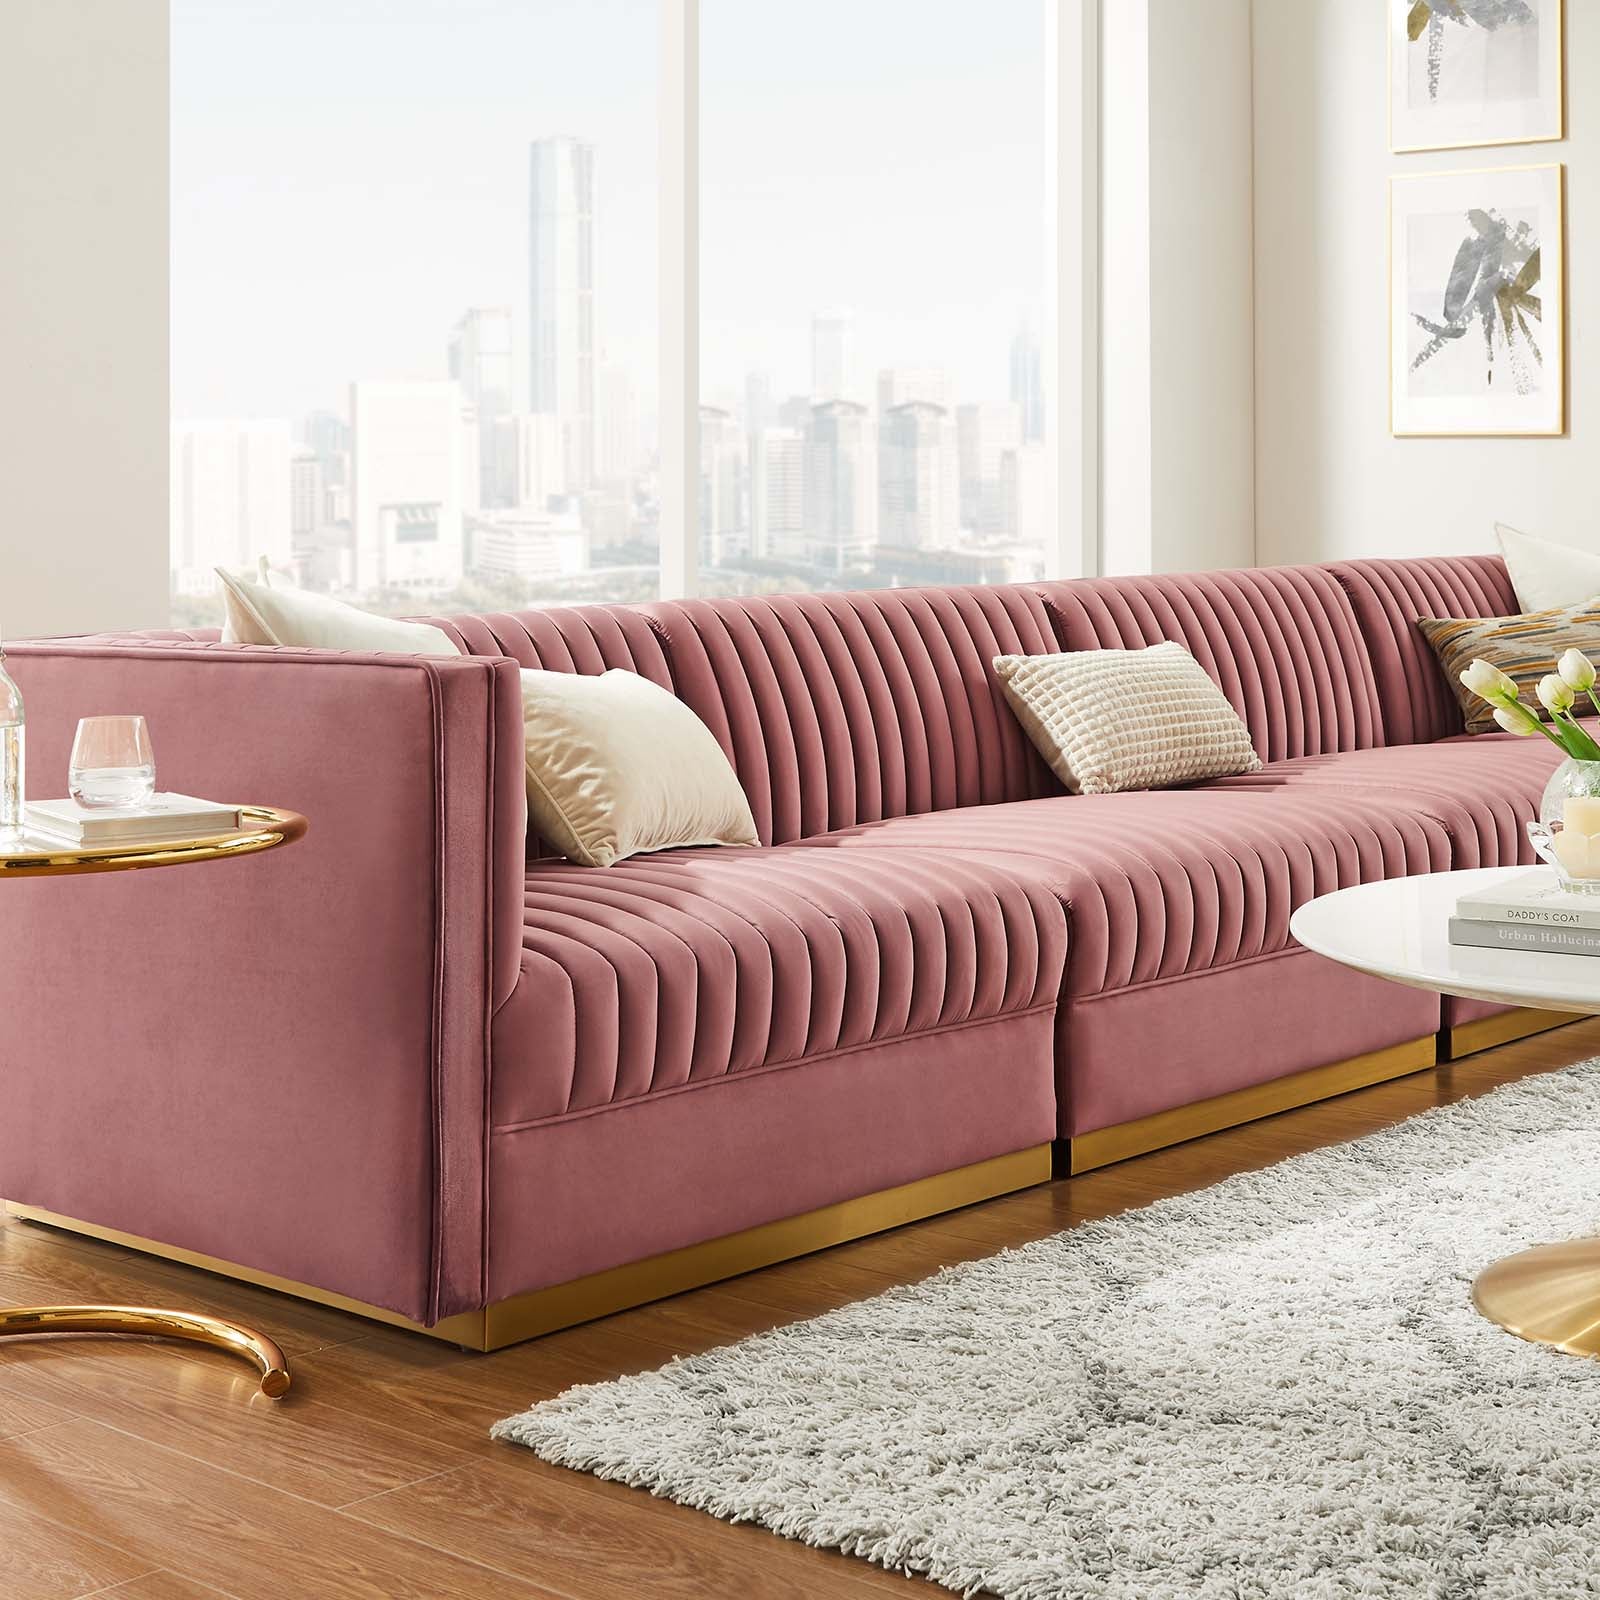 Modway Sectional Sofas - Sanguine Channel Tufted Performance Velvet 4-Seat Modular Sectional Sofa Dusty Rose